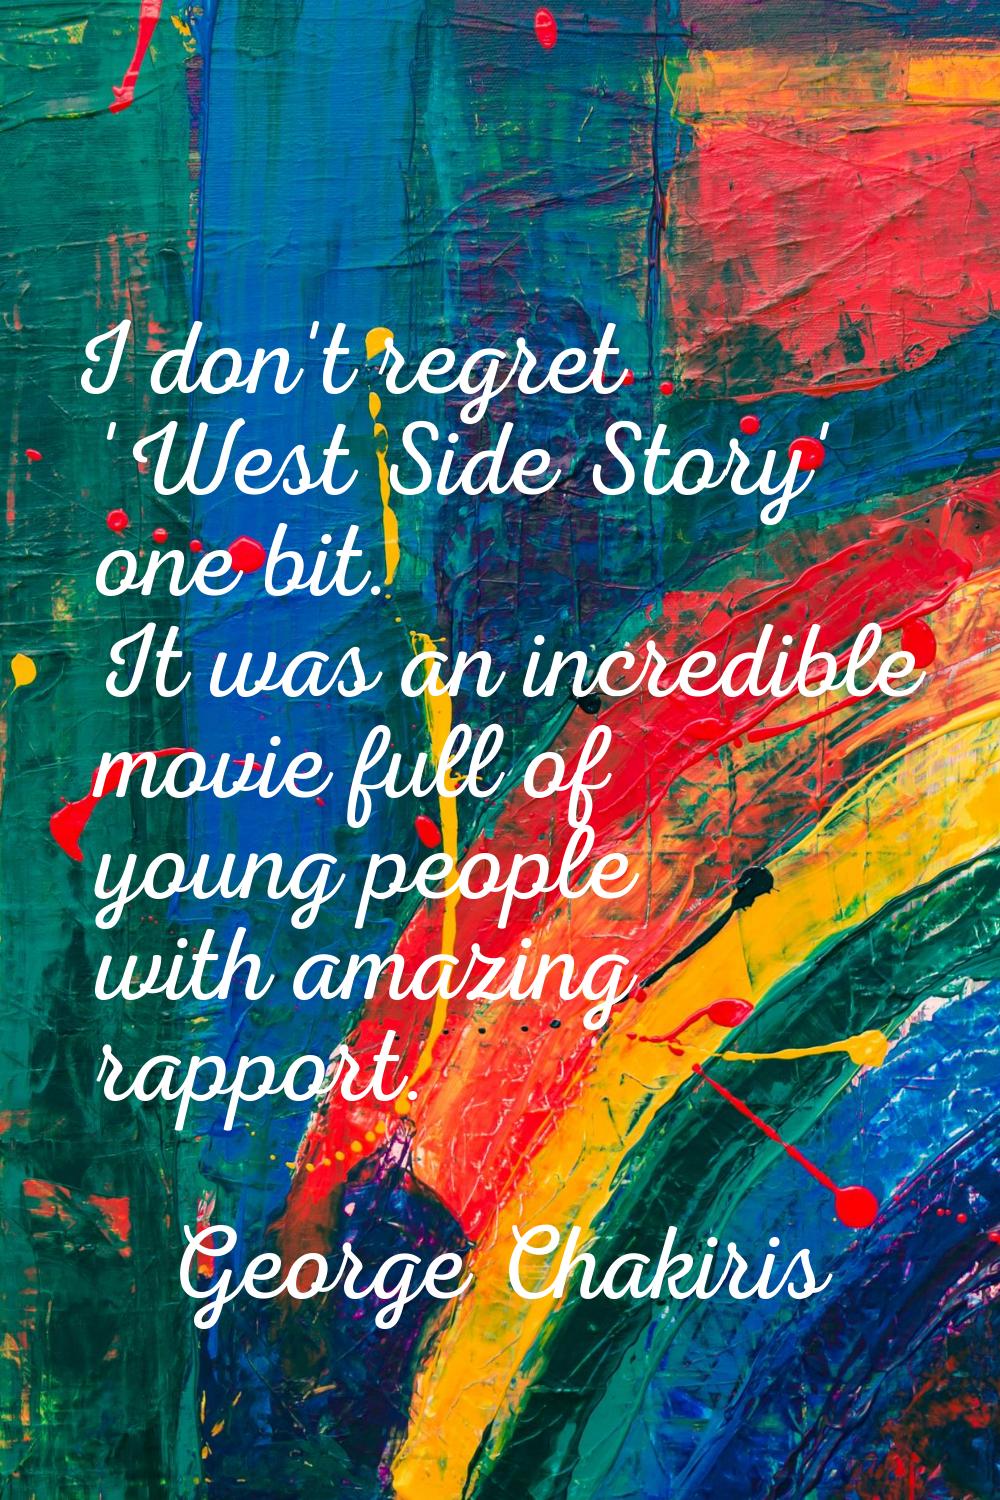 I don't regret 'West Side Story' one bit. It was an incredible movie full of young people with amaz